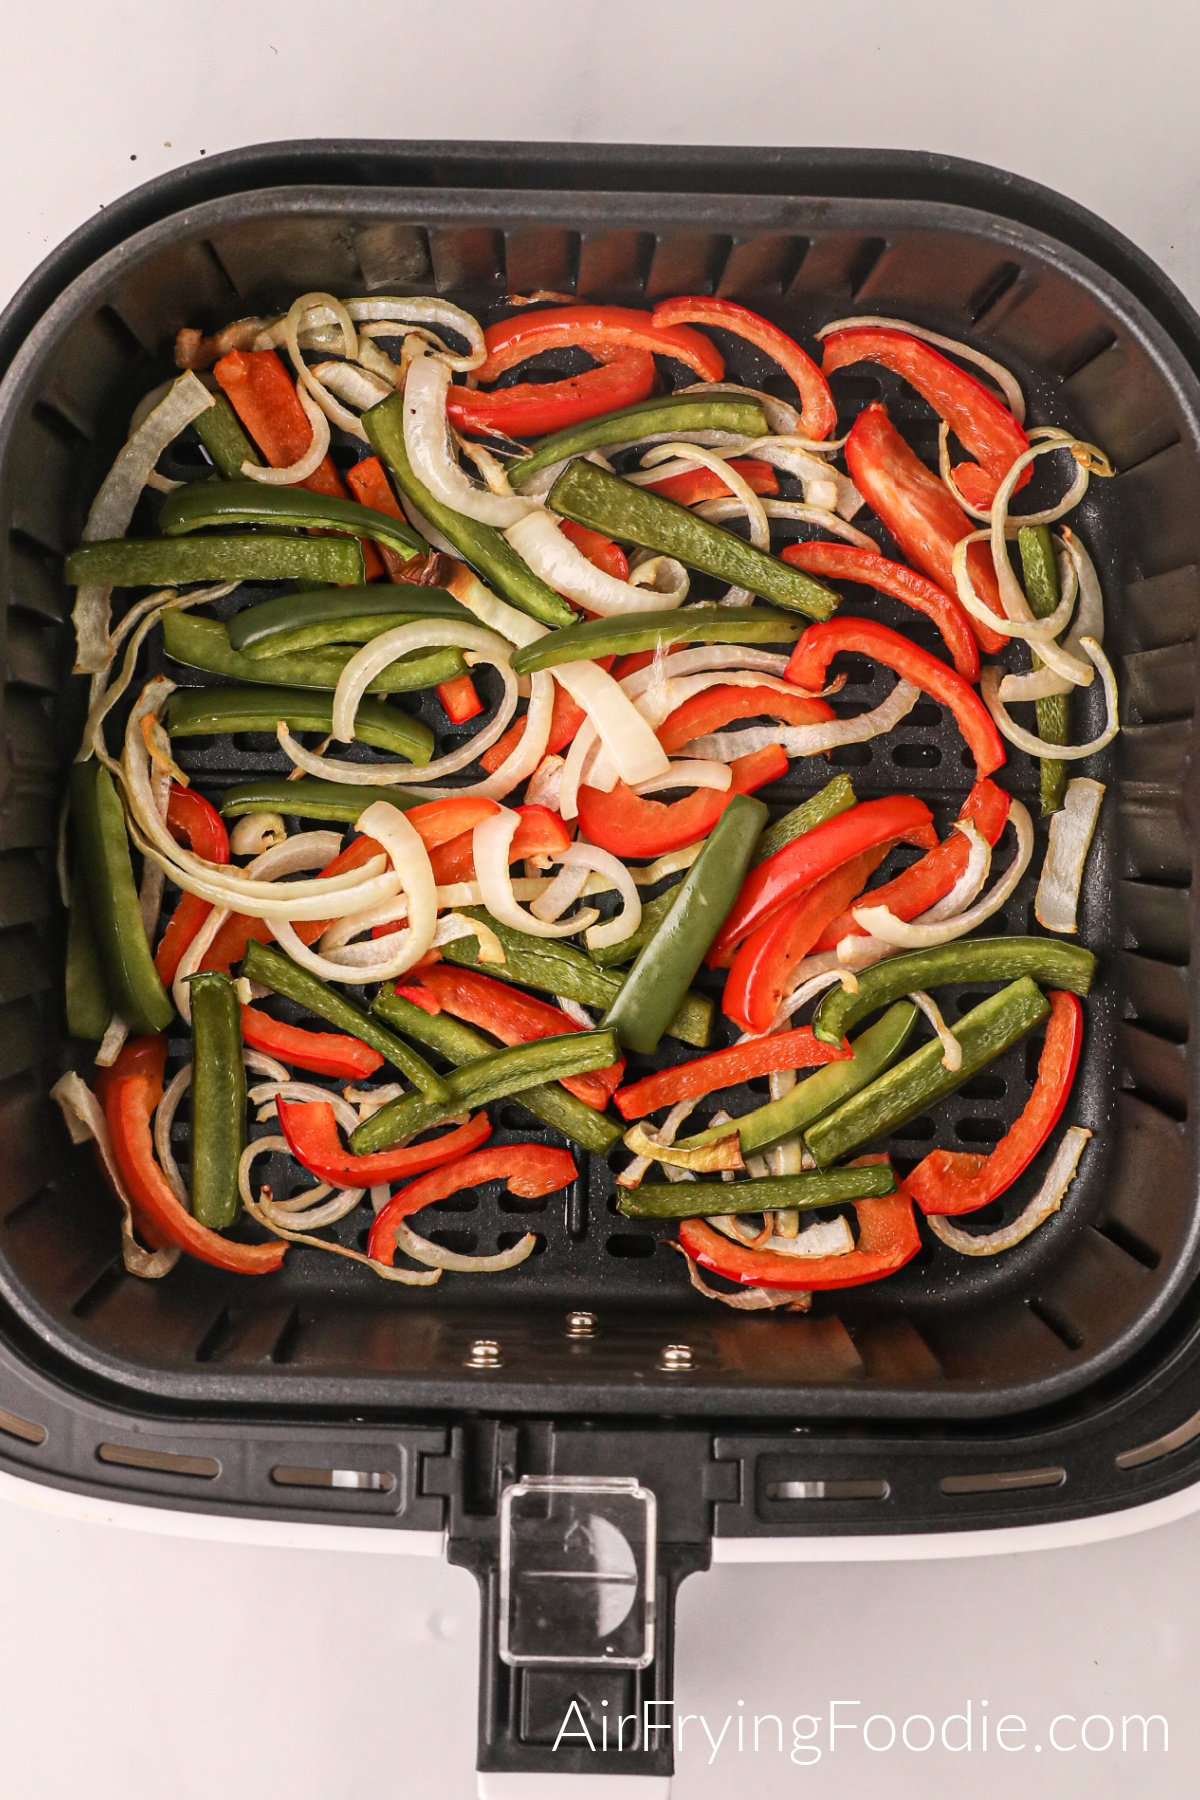 Peppers and onions in the basket of the air fryer.